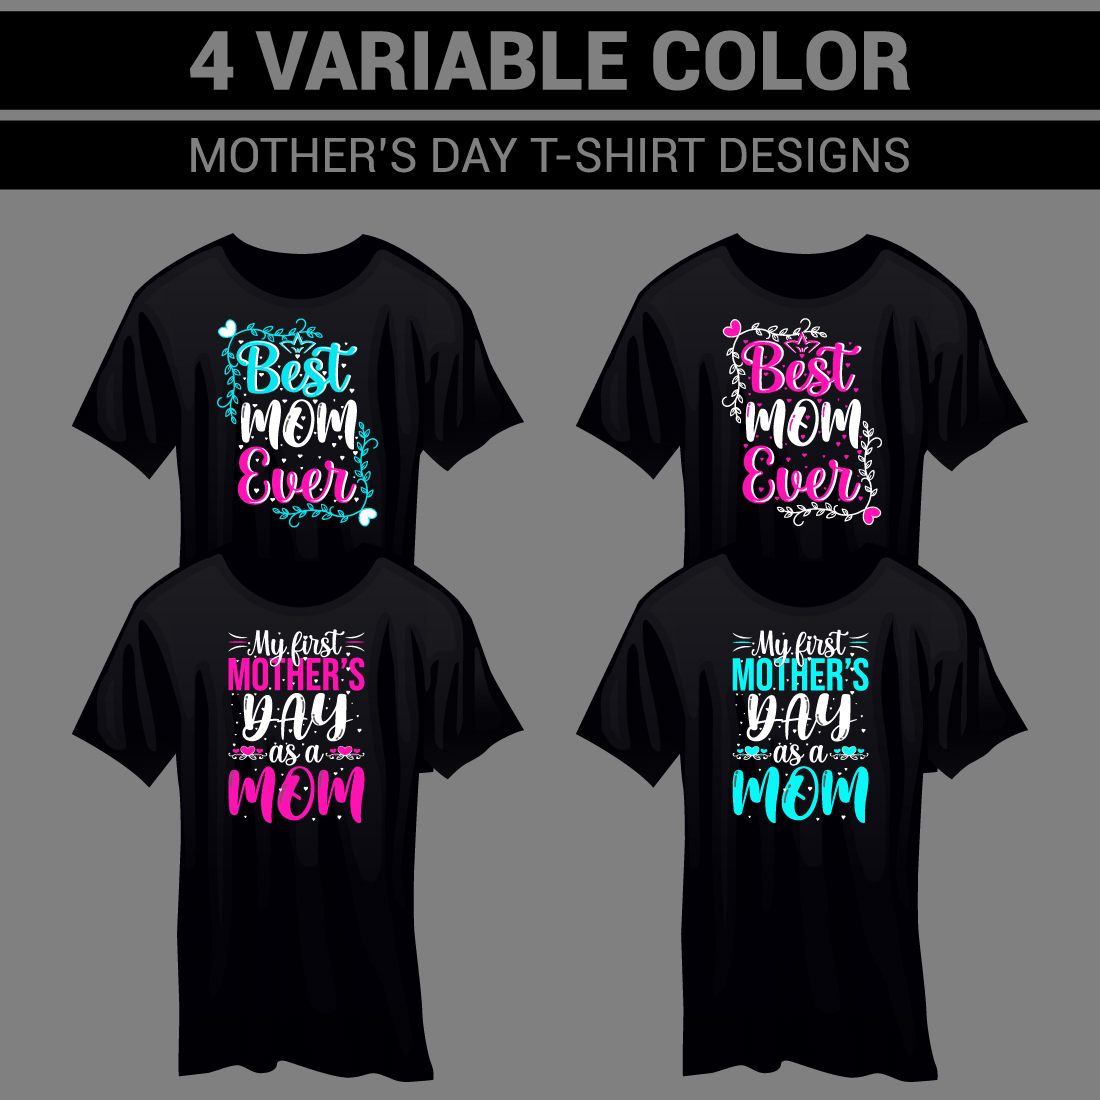 4 Variable Color Mother's Day T Shirt Designs cover image.